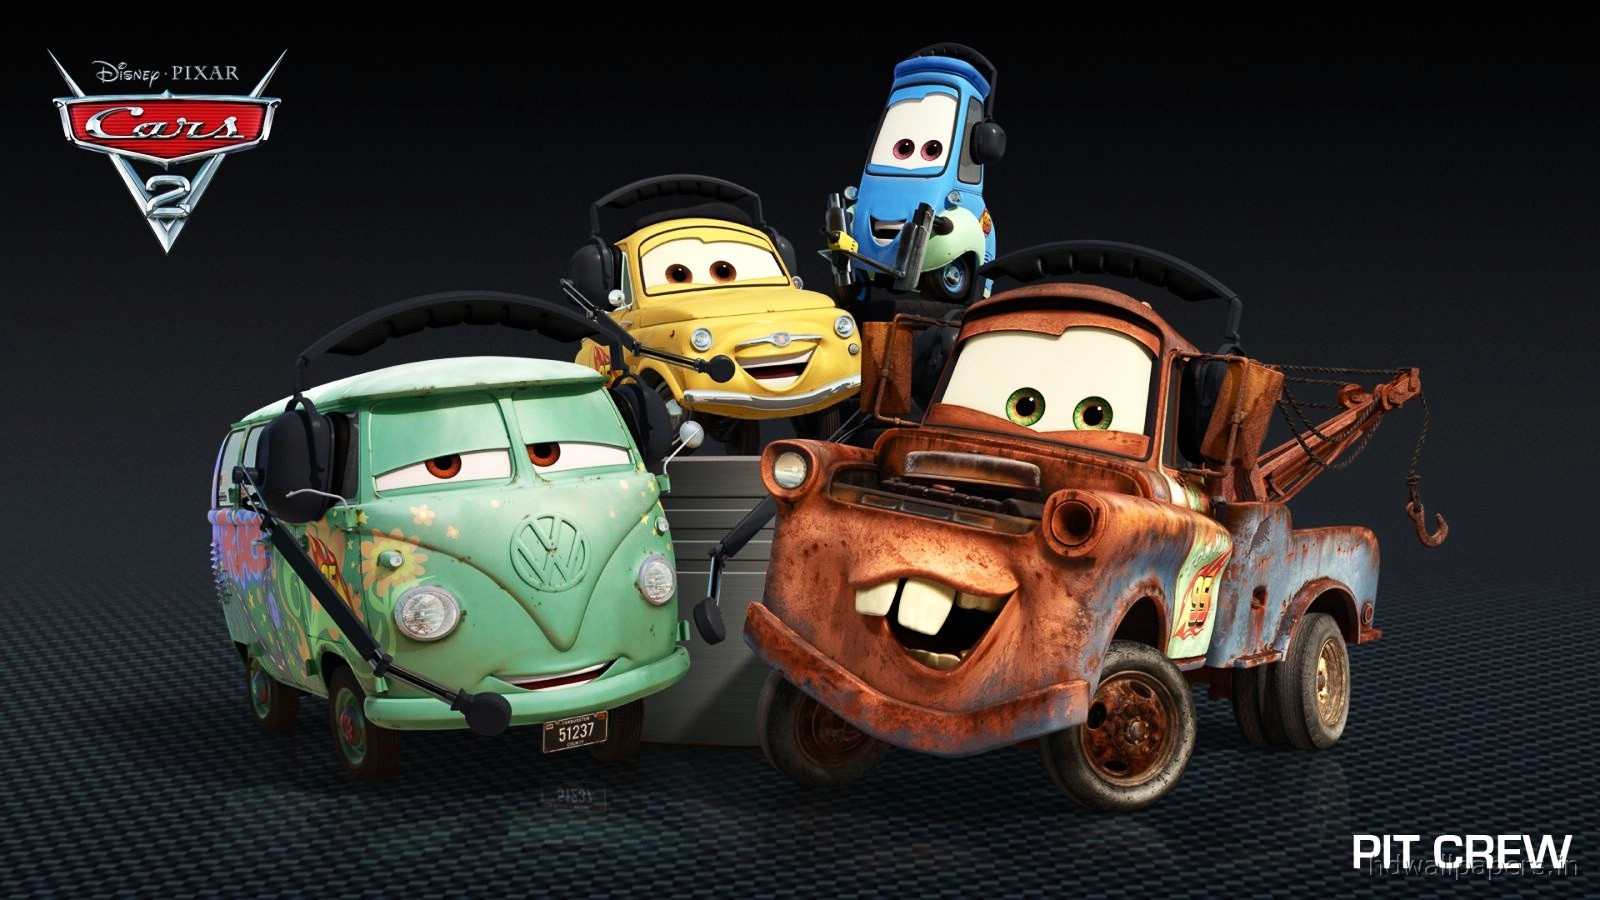 Download Free Cars 2 3D HD WallpapersHigh Resolution Backgrounds for